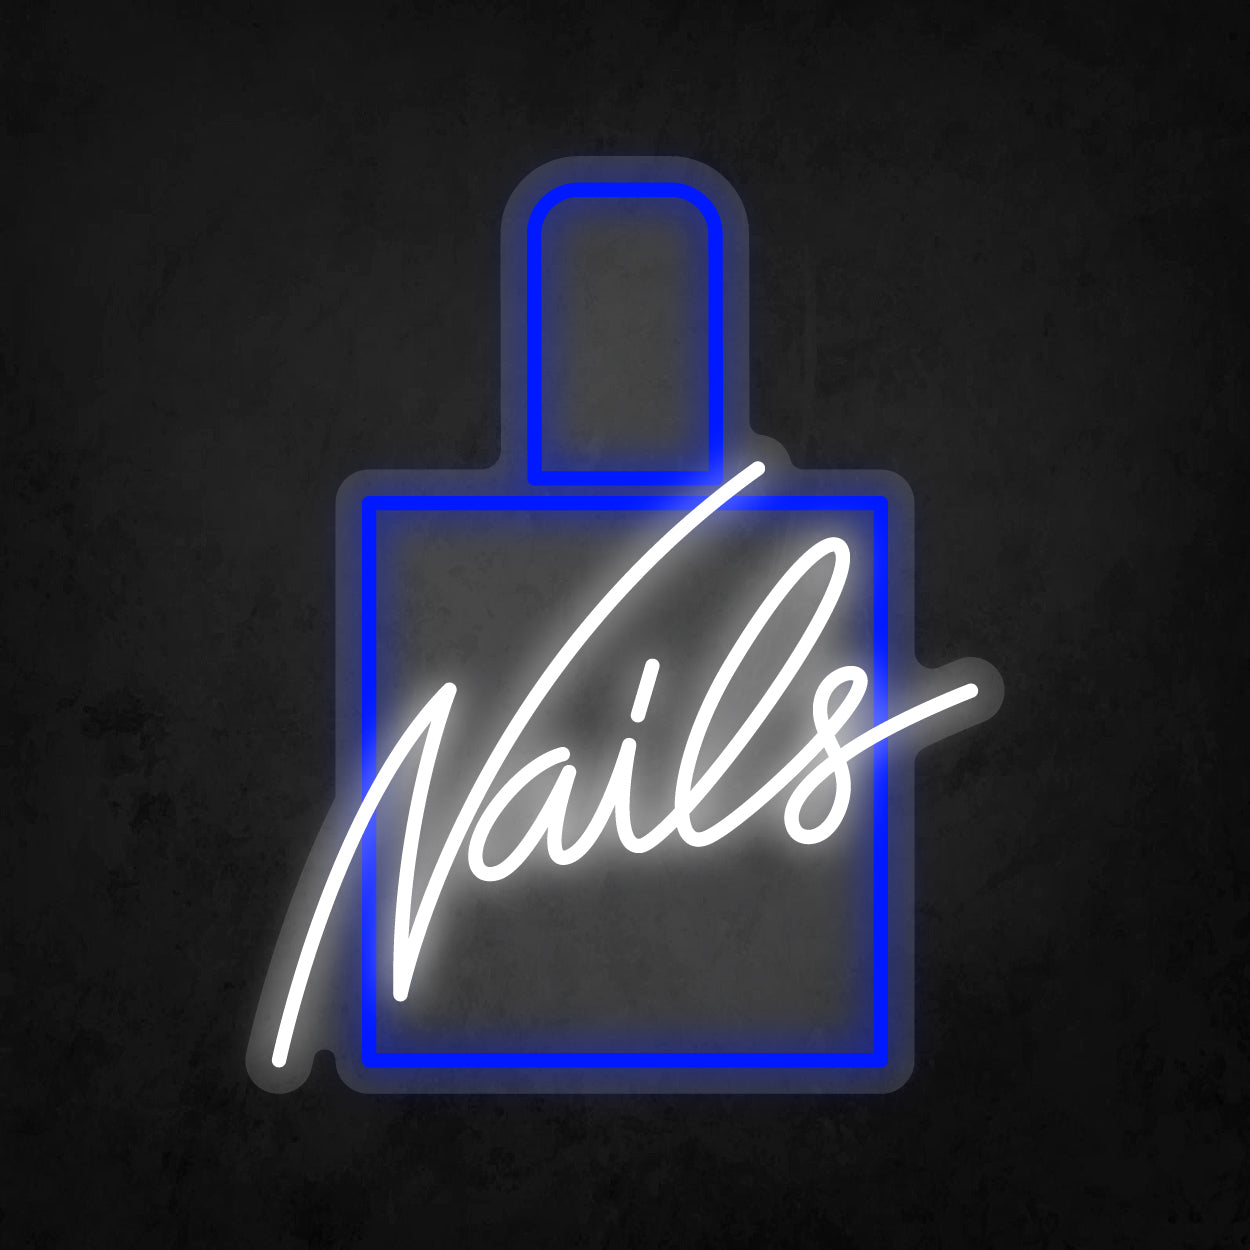 LED Neon Sign - Nails